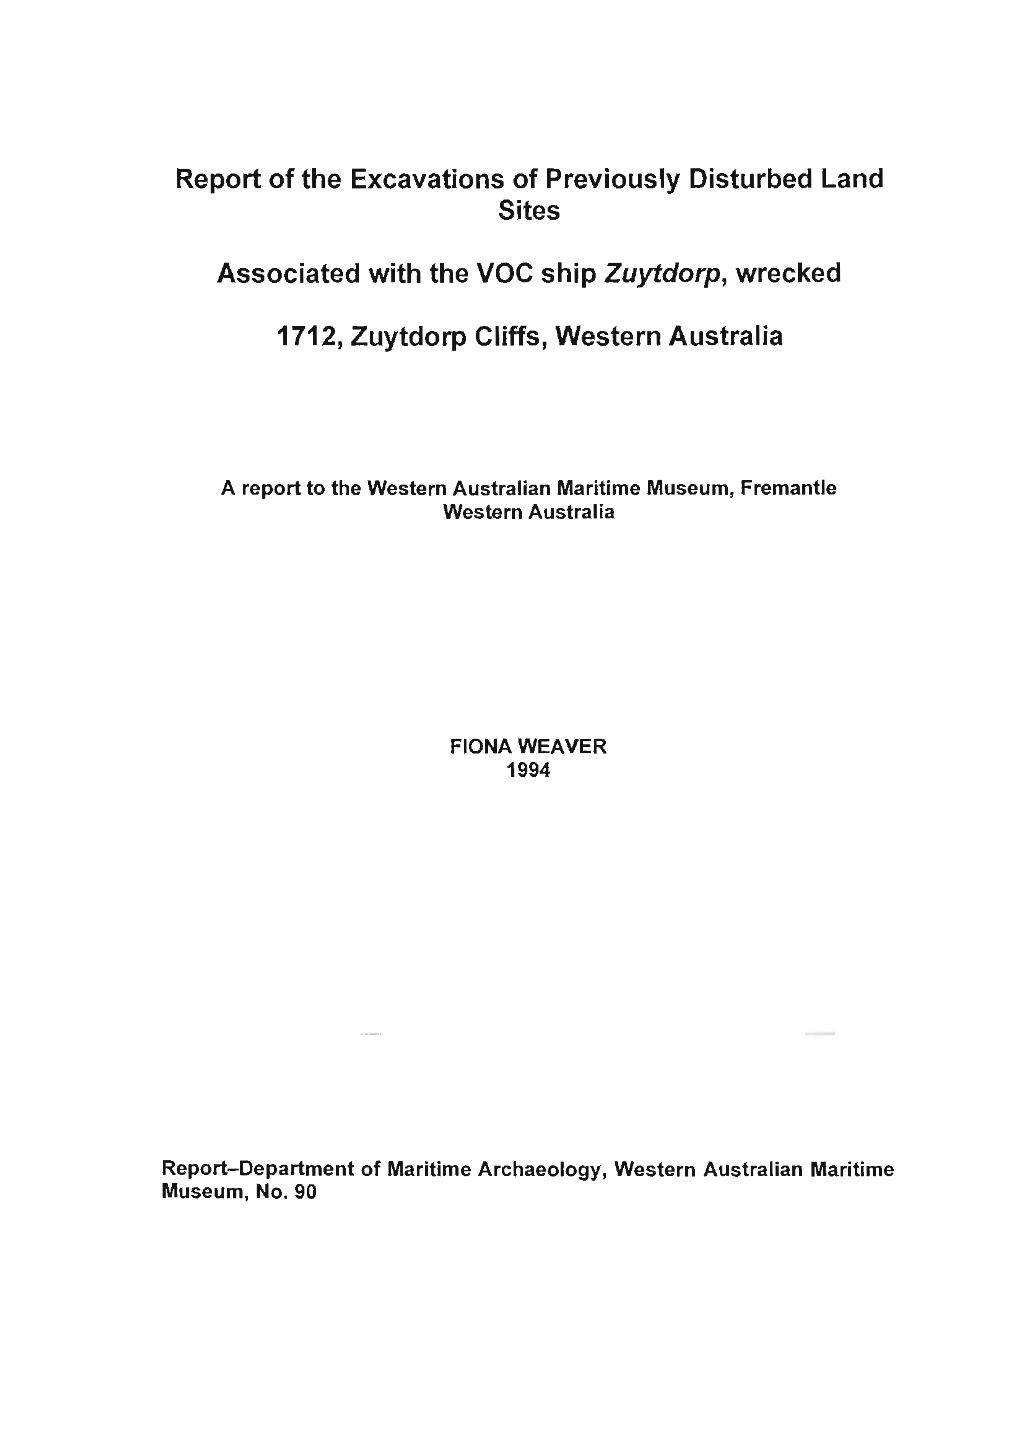 Zuytdorp Report Land Site 1990 Report of the Excavations of Previously Disturbed Land Sites